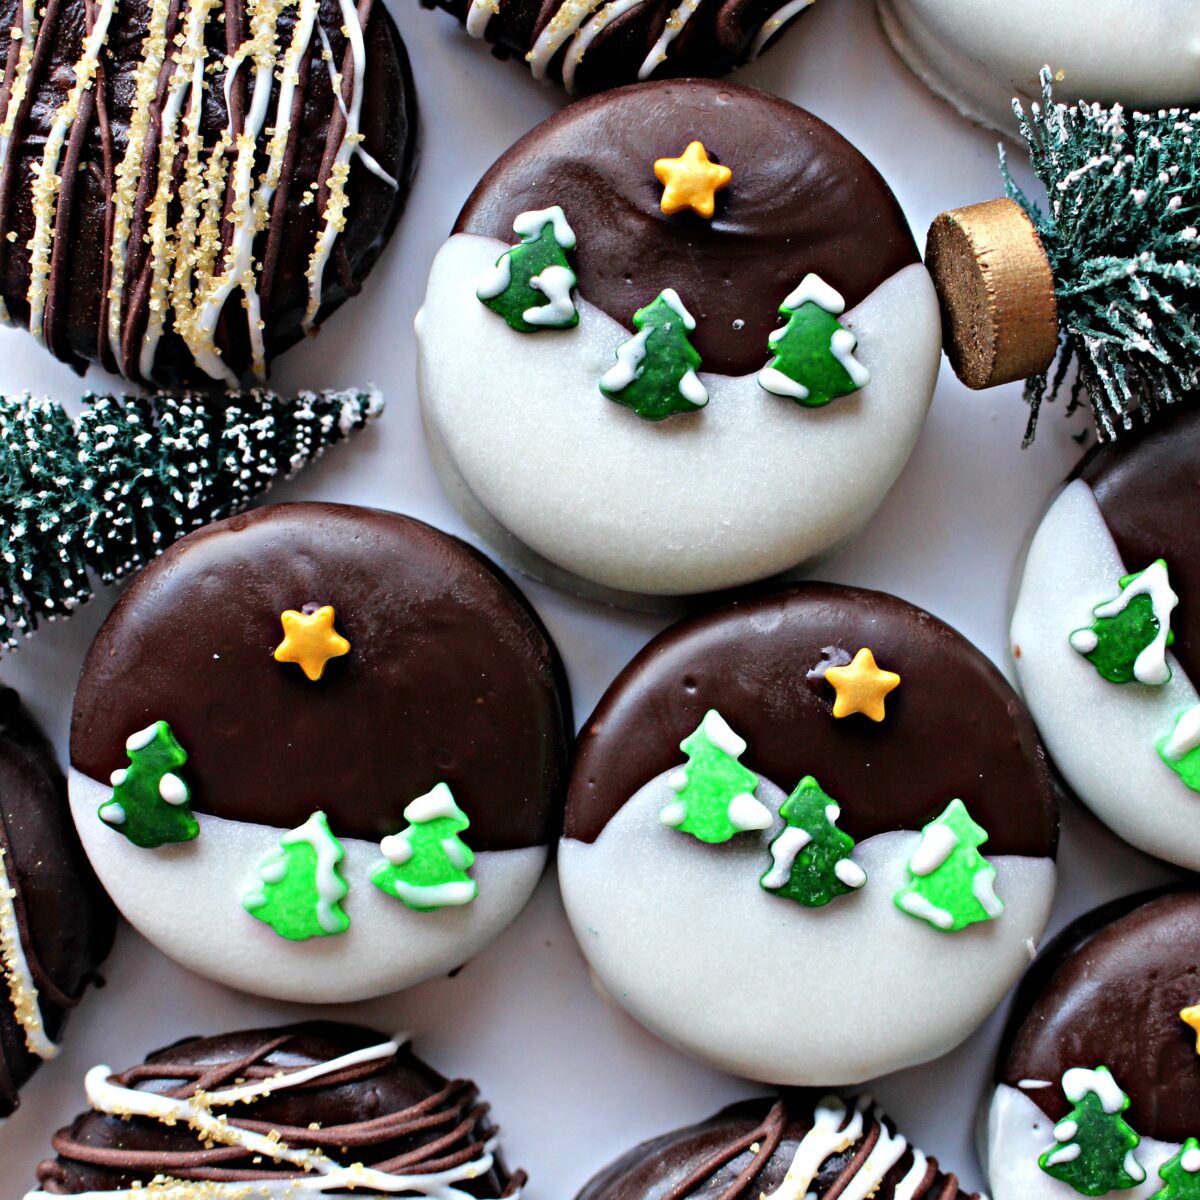 Chocolate Dipped Oreos with a winter wonderland scene of snow and trees.